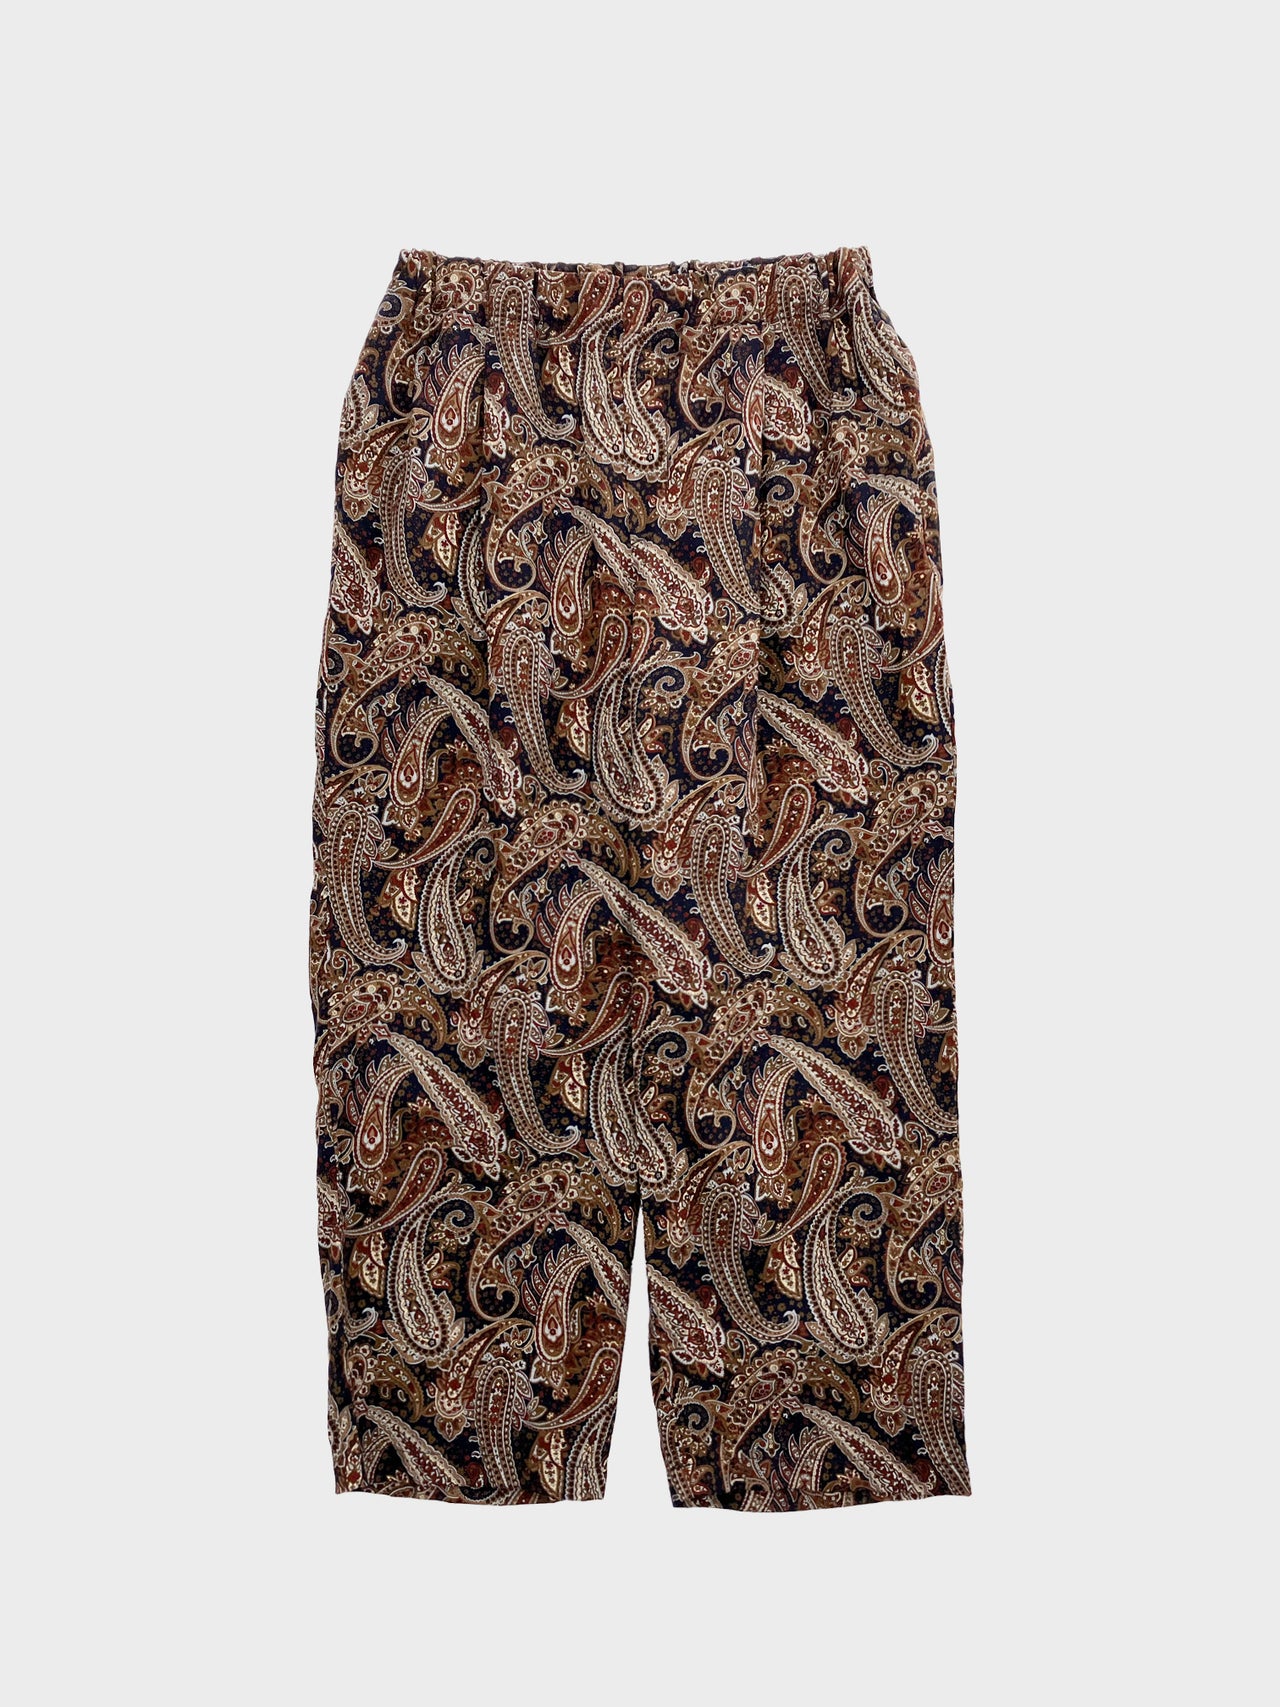 WEWILL / PAISLEY PAJAMA TROUSERS (BROWN)